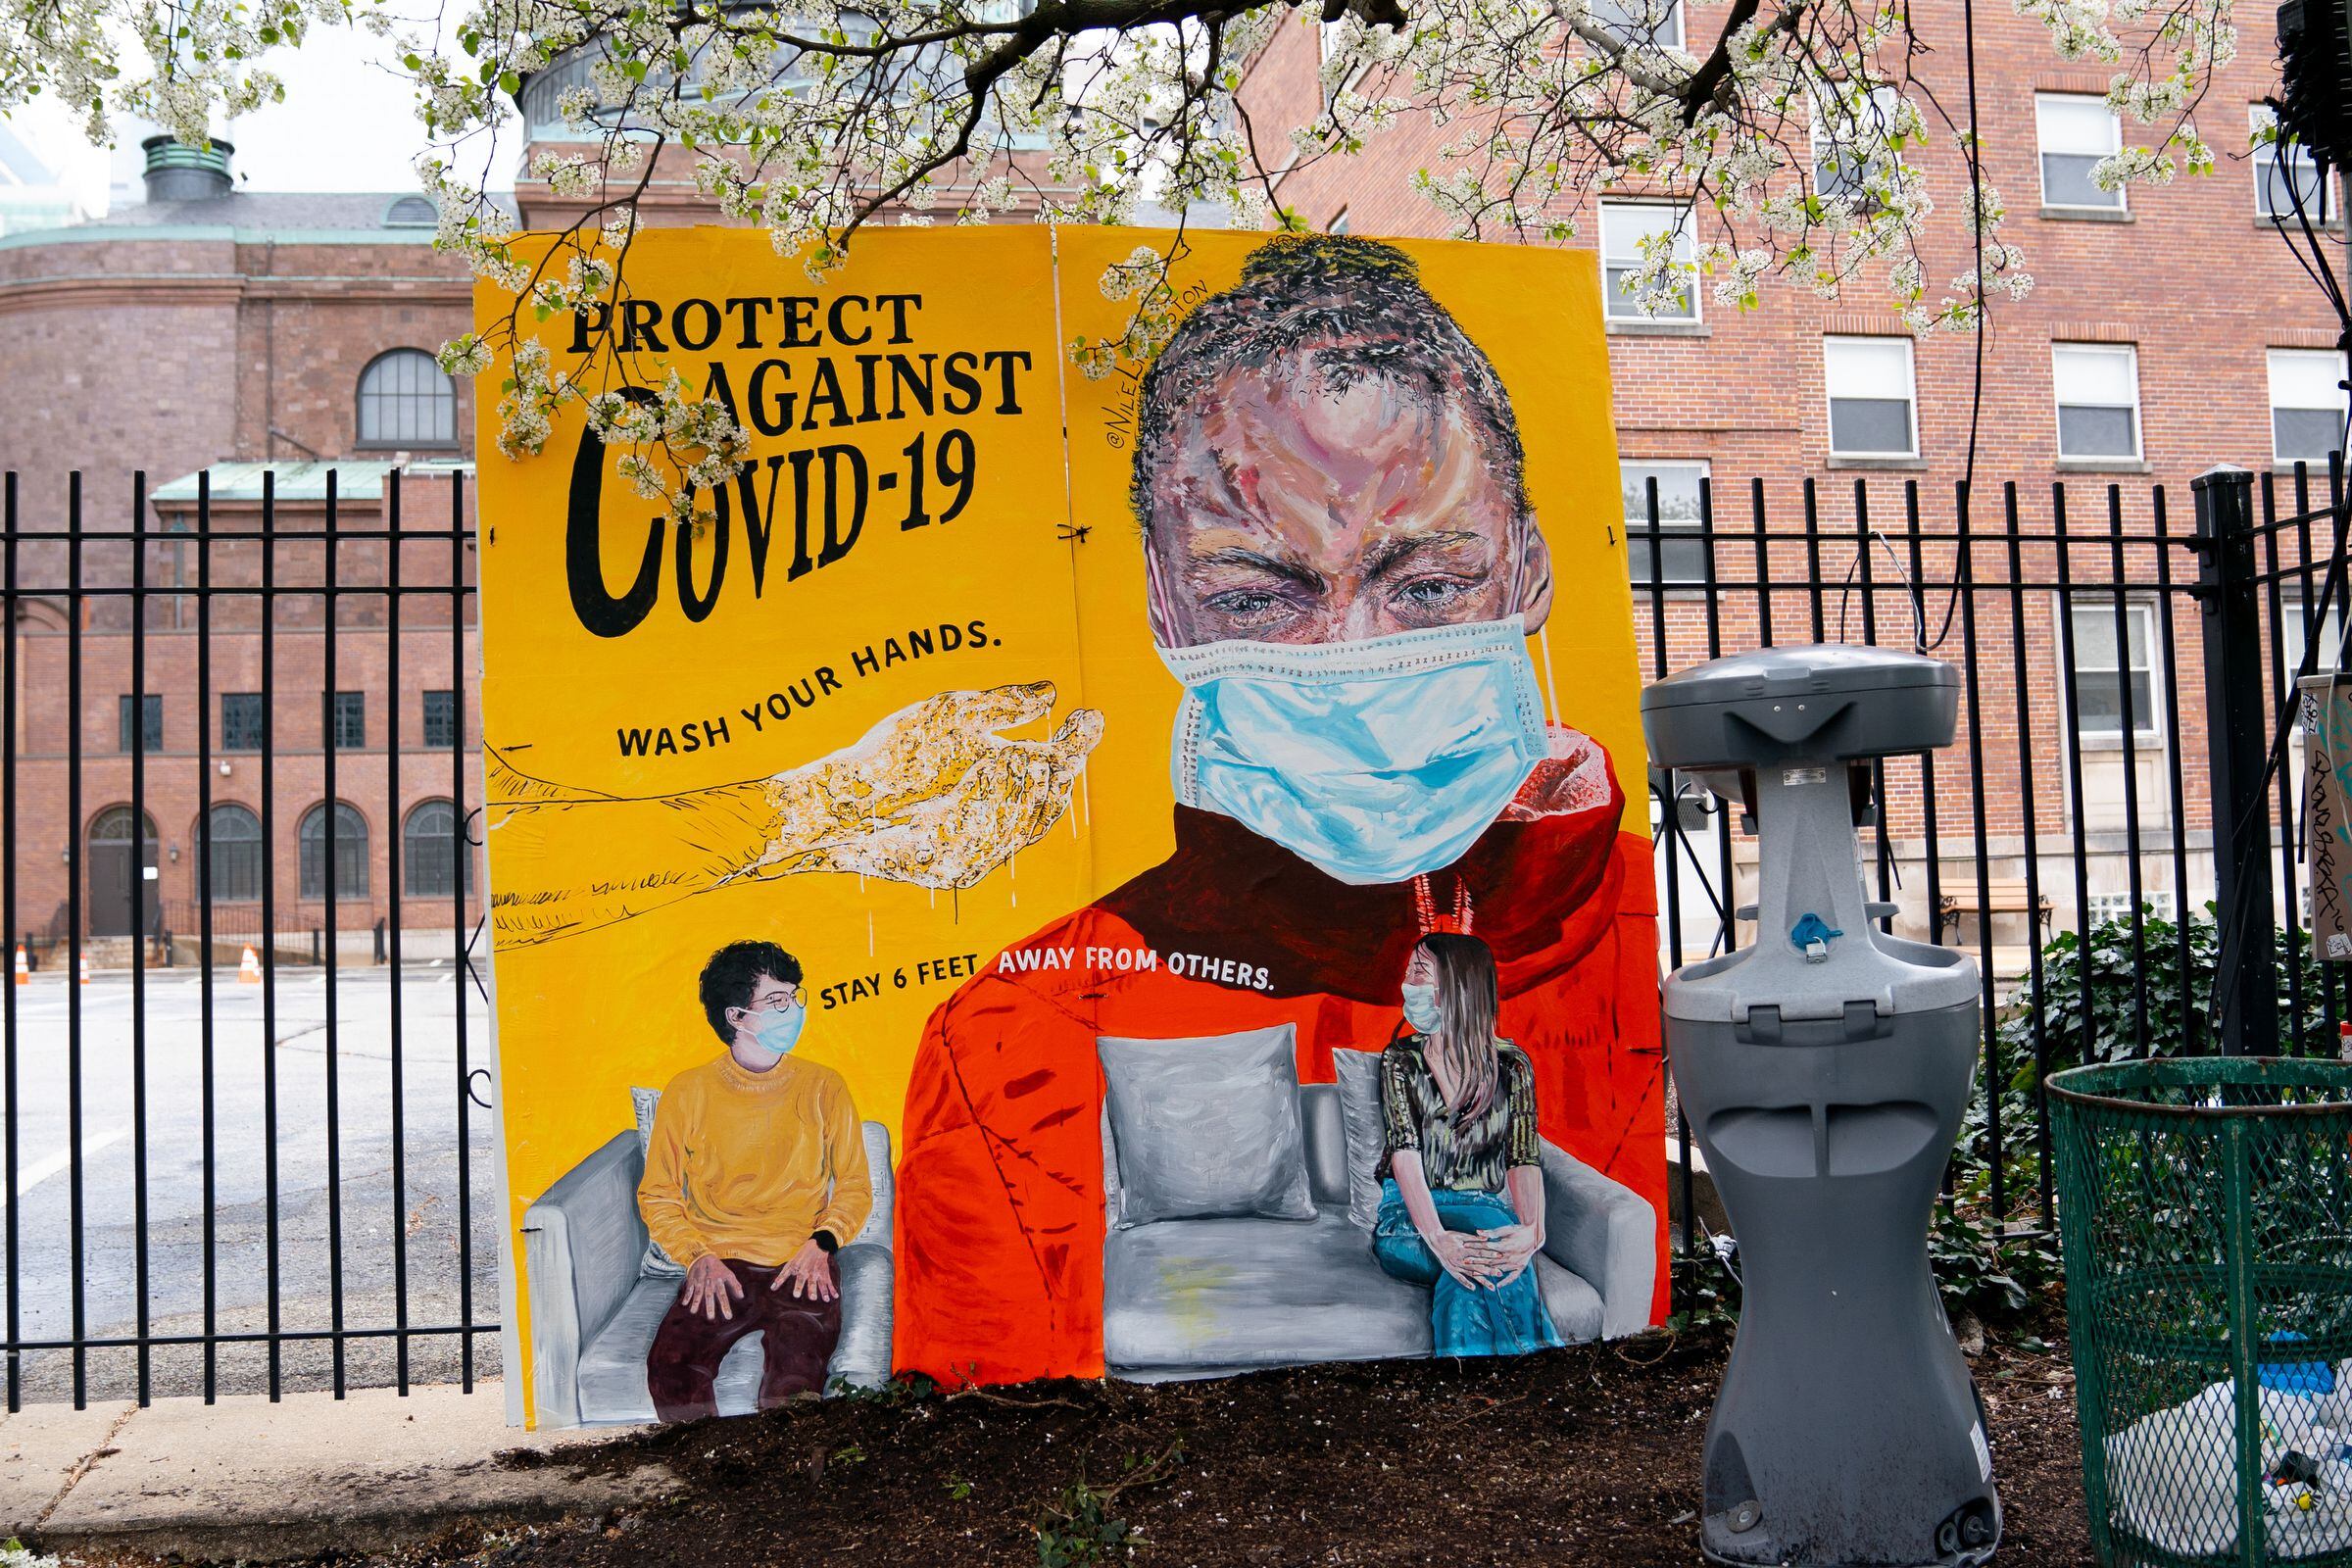 Philadelphia sees increased graffiti during pandemic, but artists